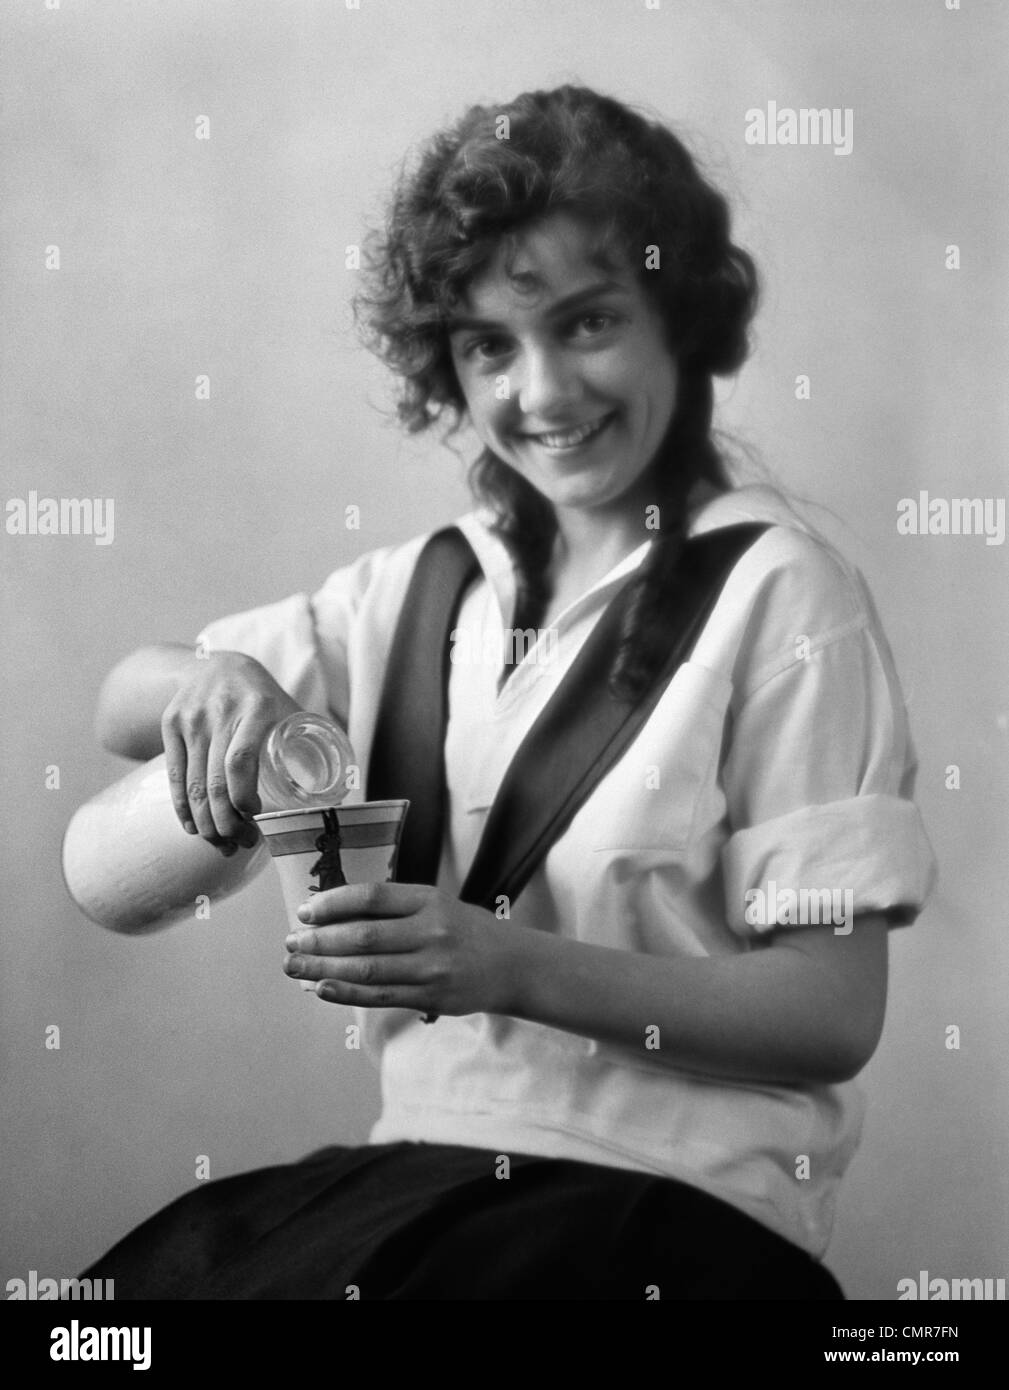 1920s SMILING YOUNG WOMAN SITTING POURING MILK FROM BOTTLE INTO CUP LOOKING AT CAMERA Stock Photo